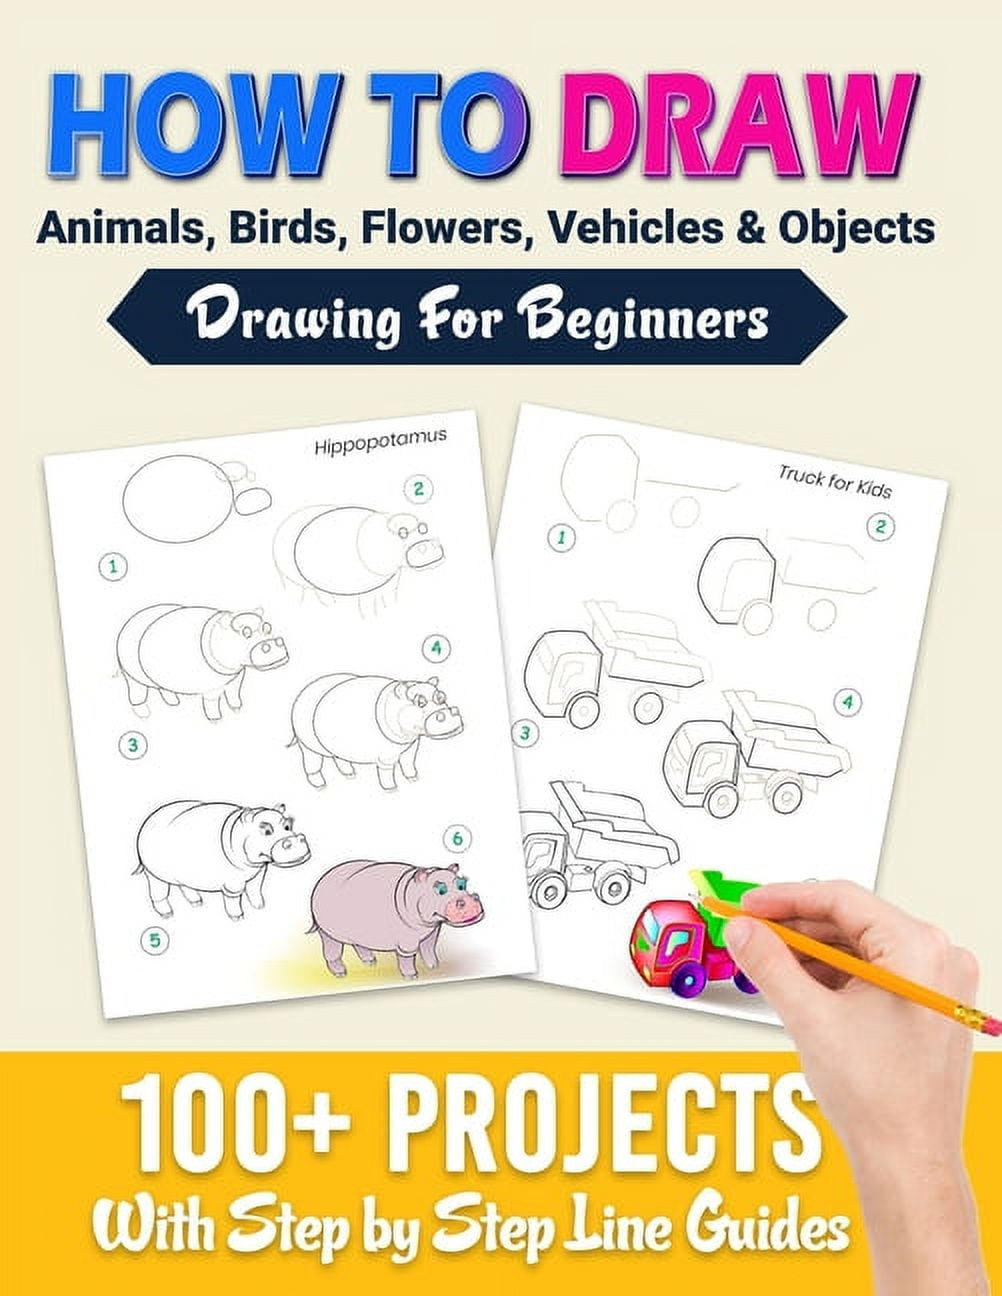 HOW TO DRAW ANIMALS simple drawing method STEP BY STEP 100 TEMPLATES  INSIDE: SKETCHBOOK FOR KIDS 100 DRAWINGS Cool Stuff for kids great for age  8-13 - Universal PROJECT - 9781677122400